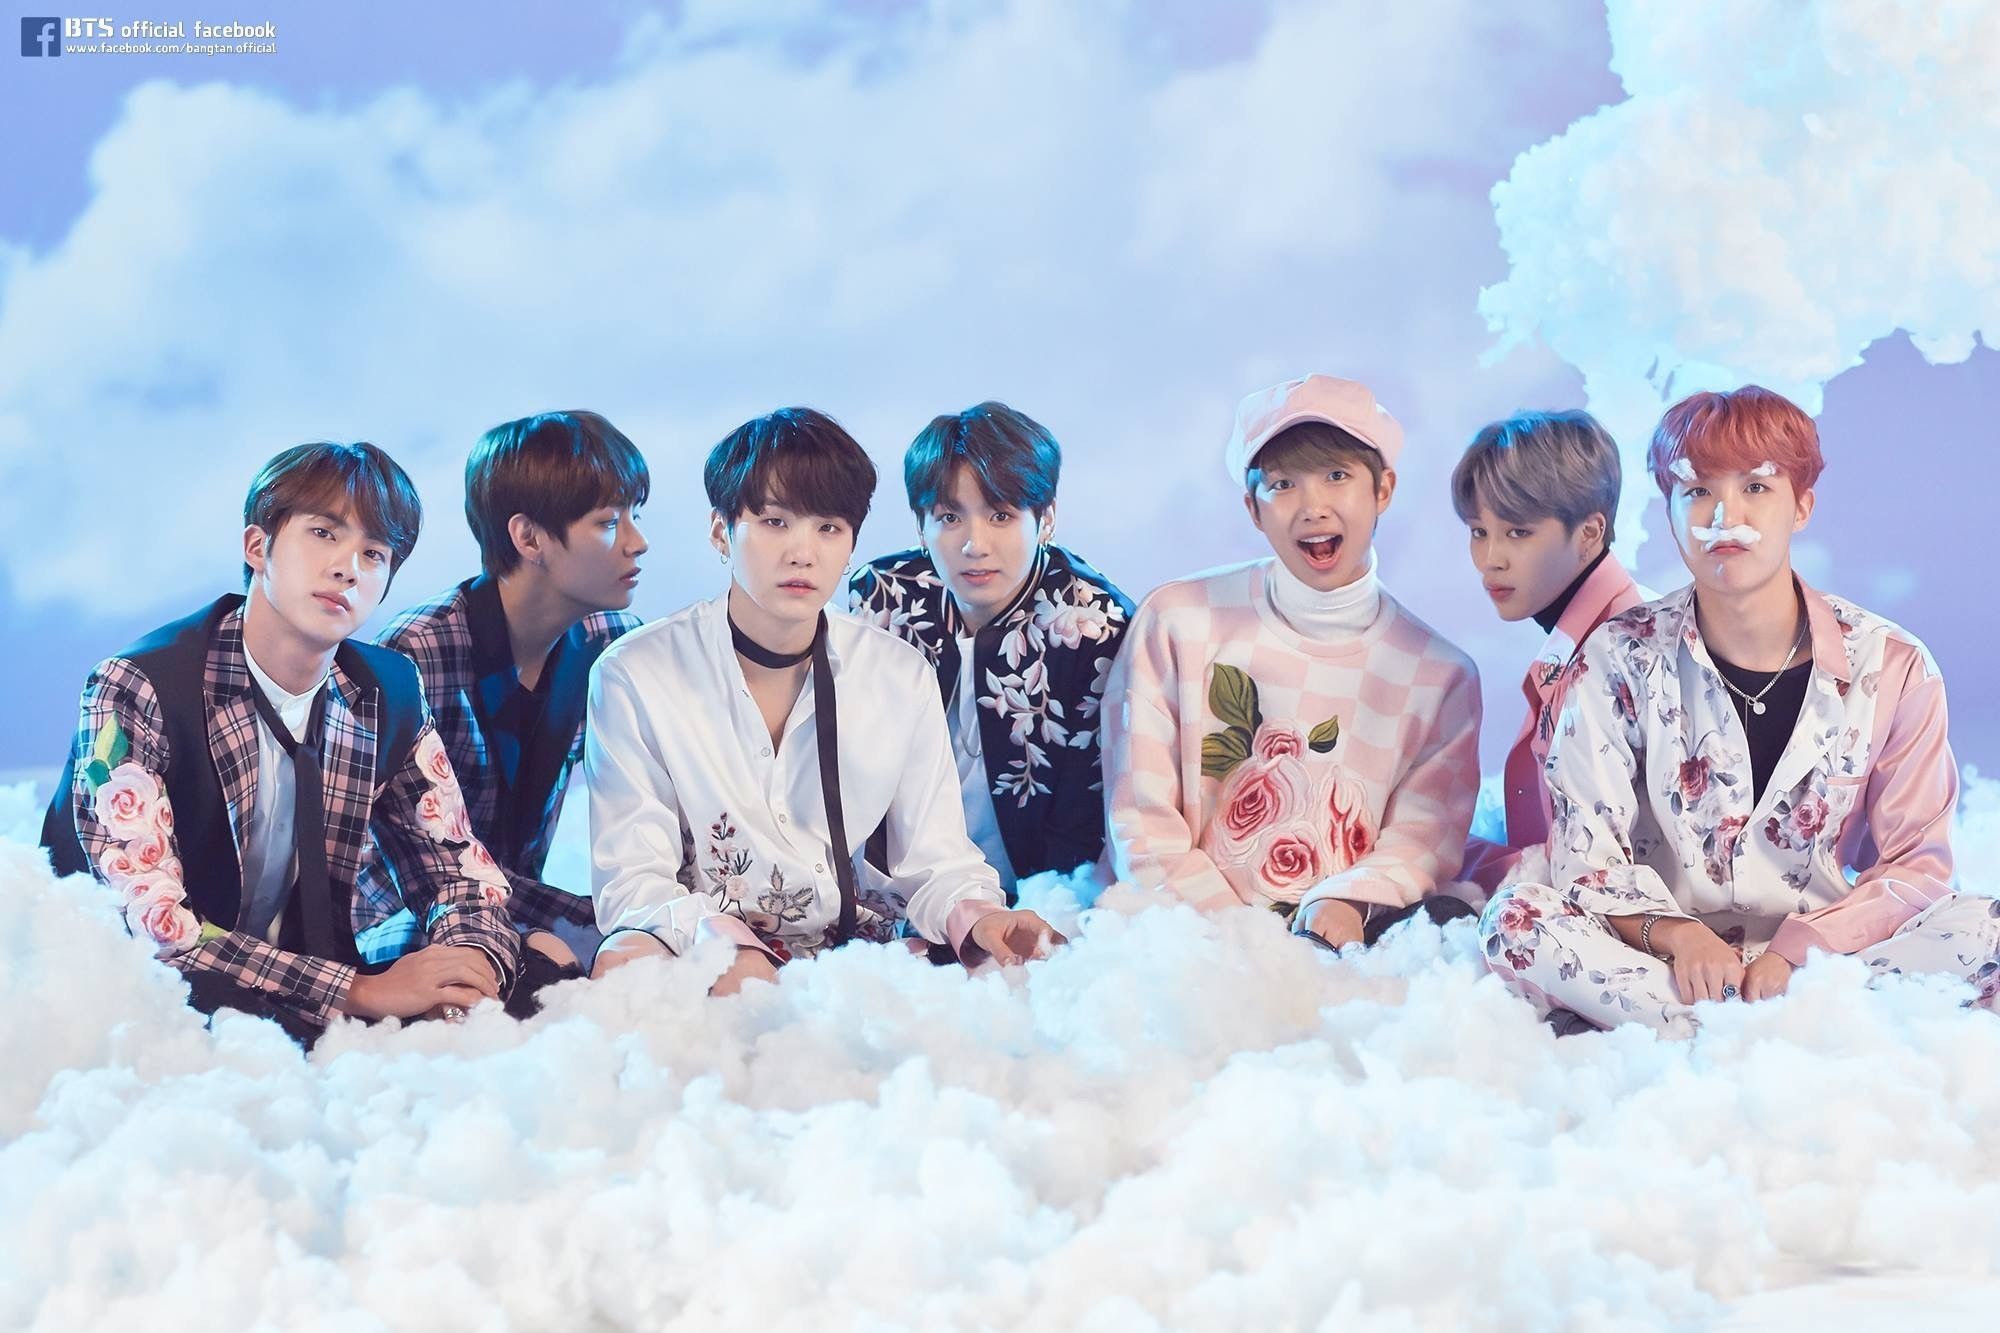 Bts pc wallpapers